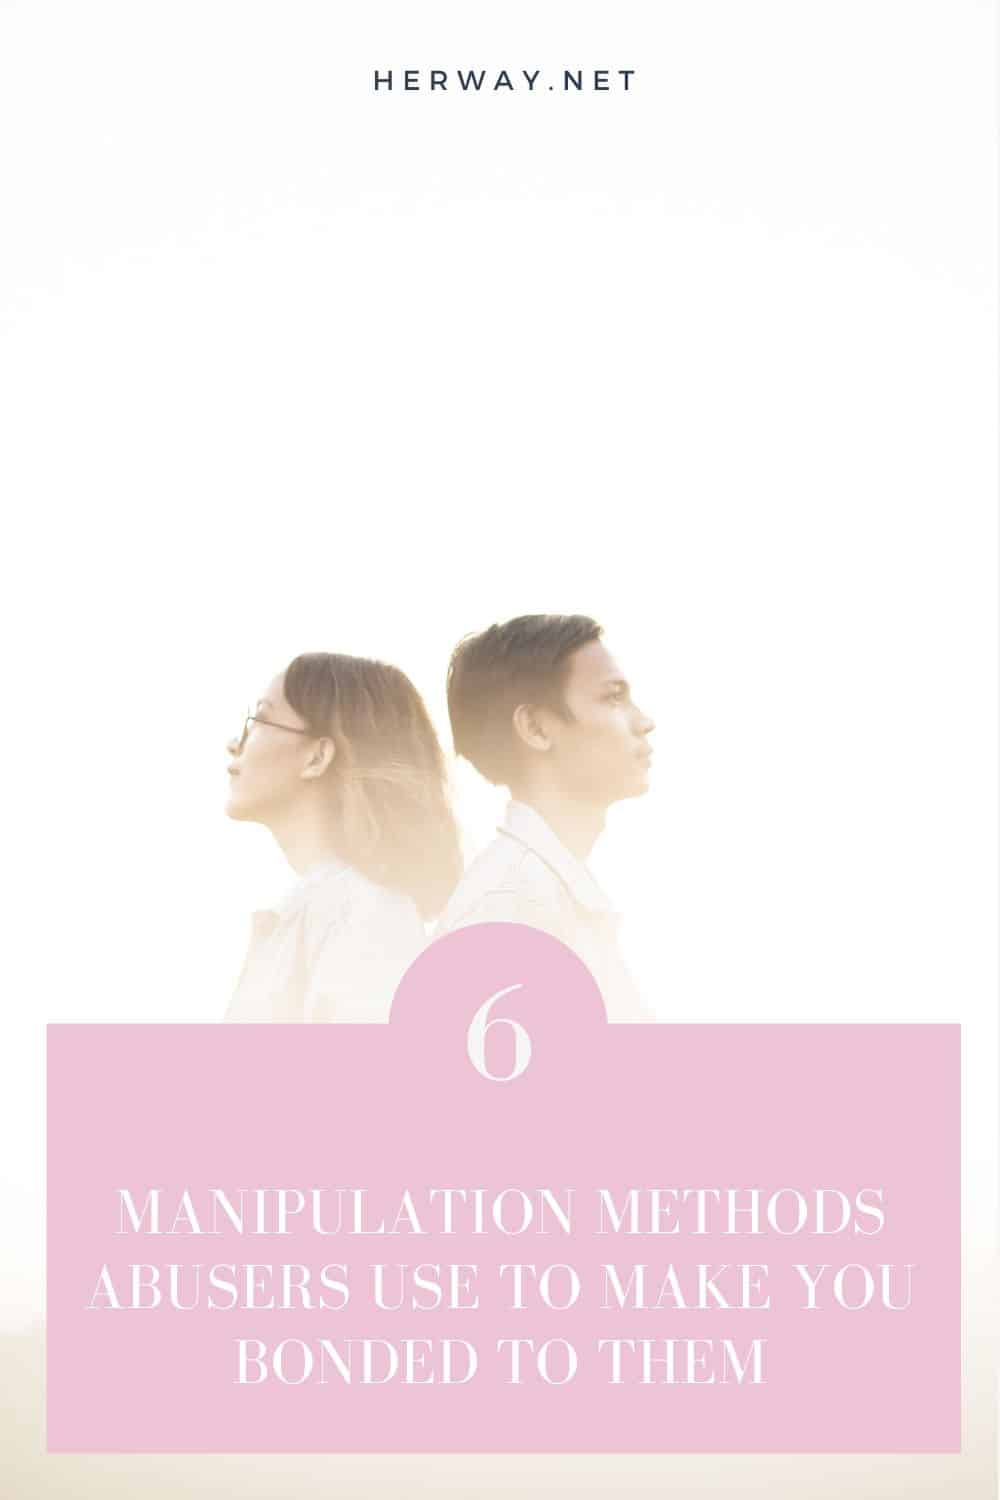 MANIPULATION METHODS ABUSERS USE TO MAKE YOU BONDED TO THEM